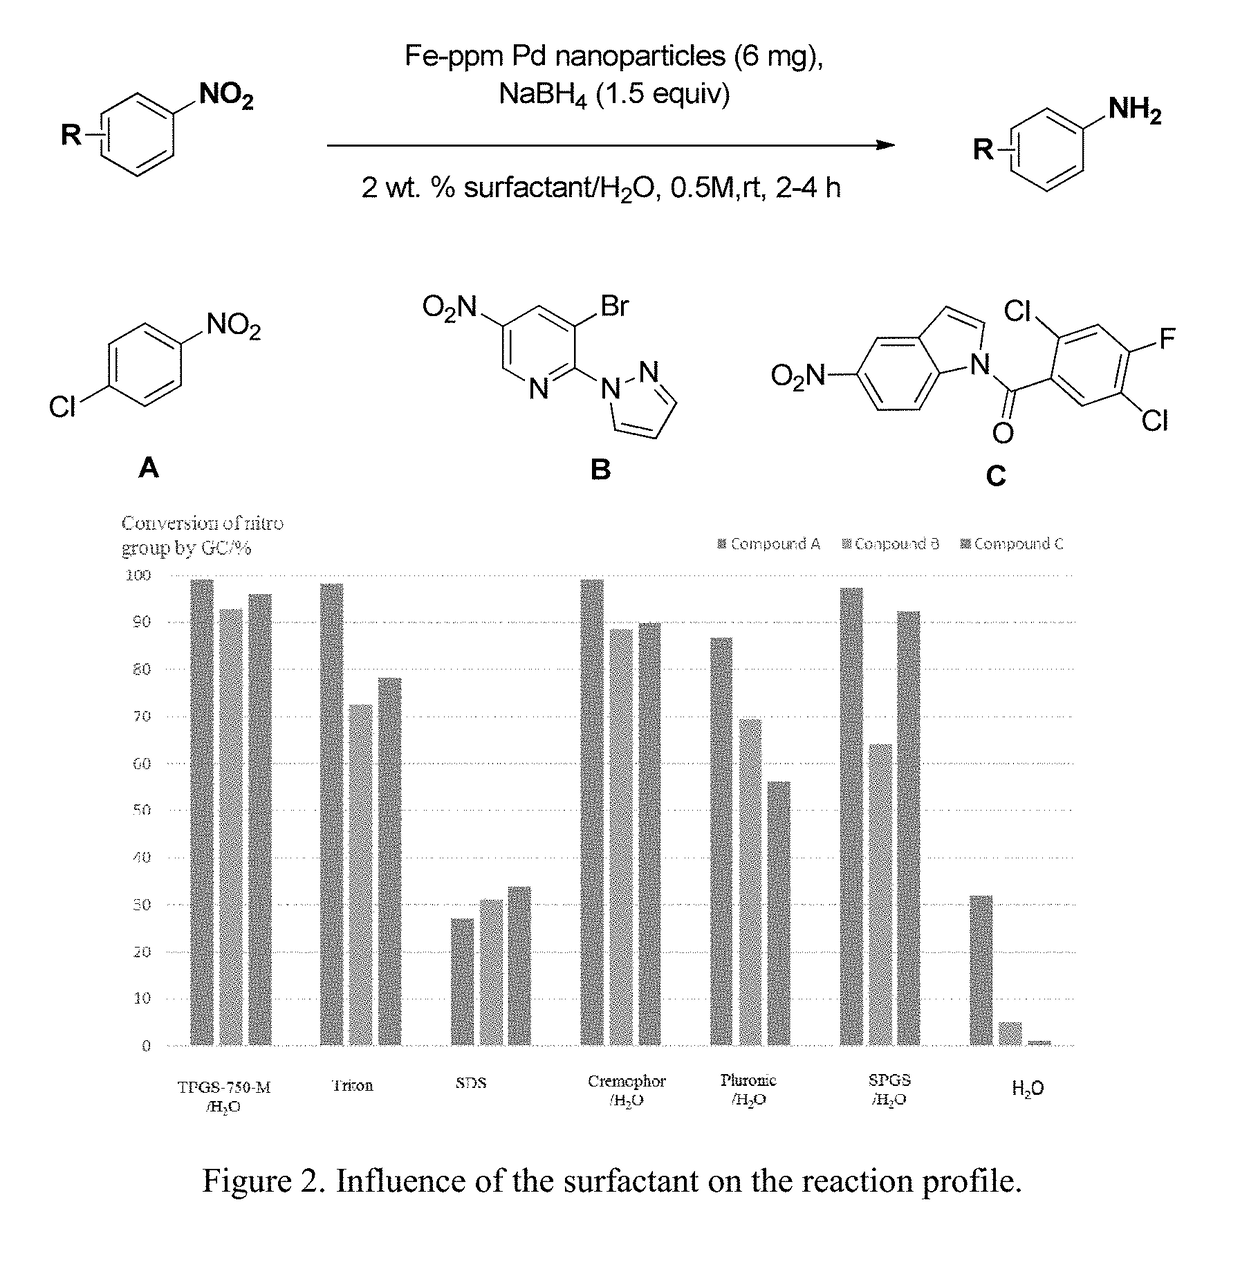 Fe-ppm Pd, Cu and/or Ni Nanoparticle-Catalyzed Reactions in Water